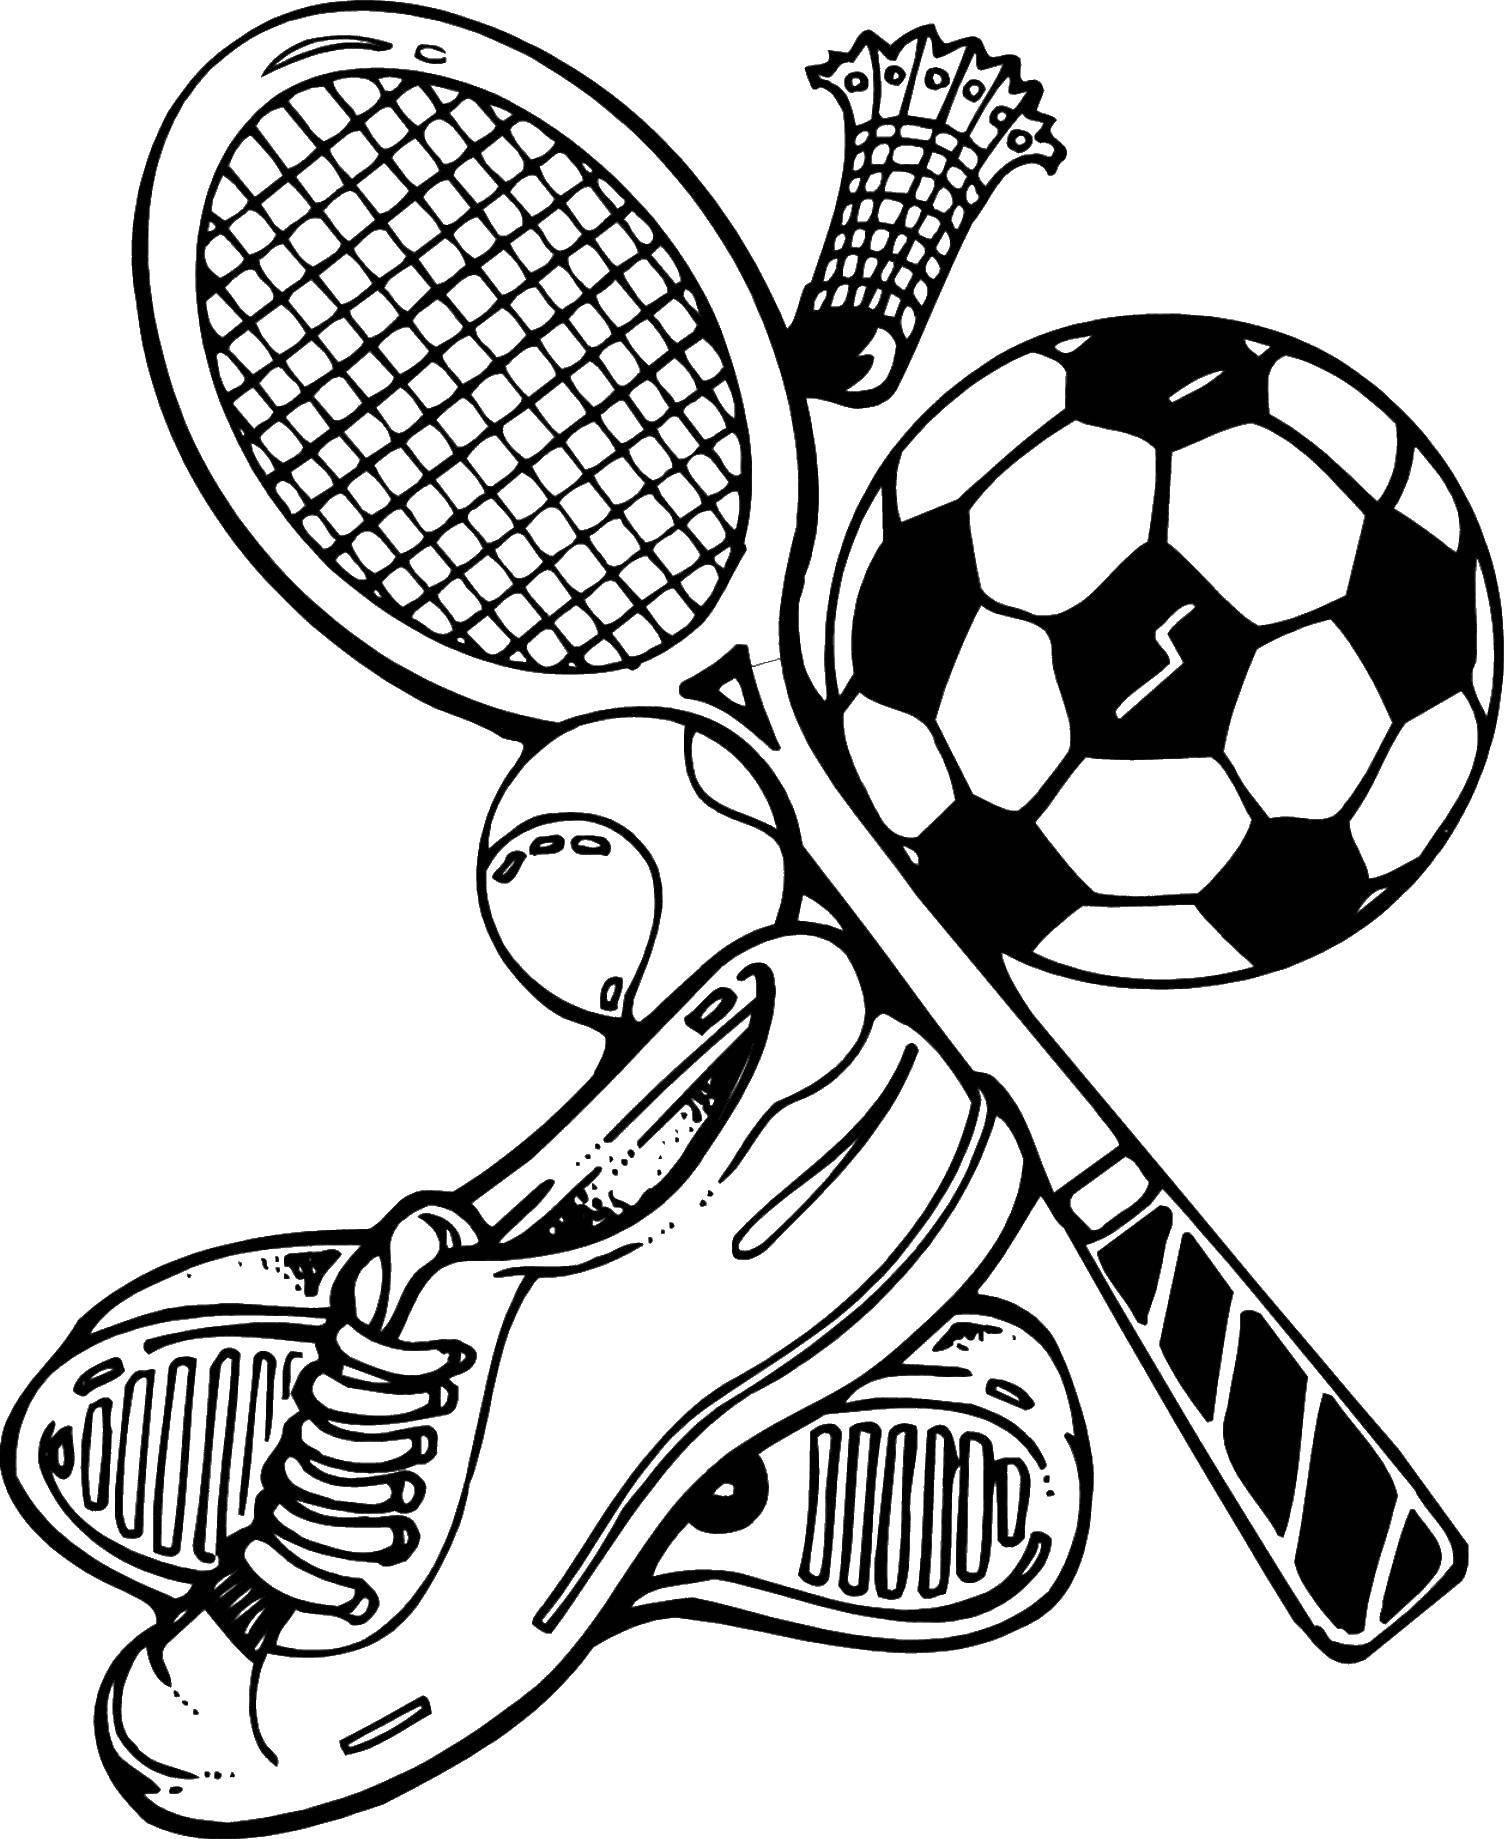 Coloring Tennis racket, shoes and ball. Category Sports. Tags:  Sports, tennis, racquet.